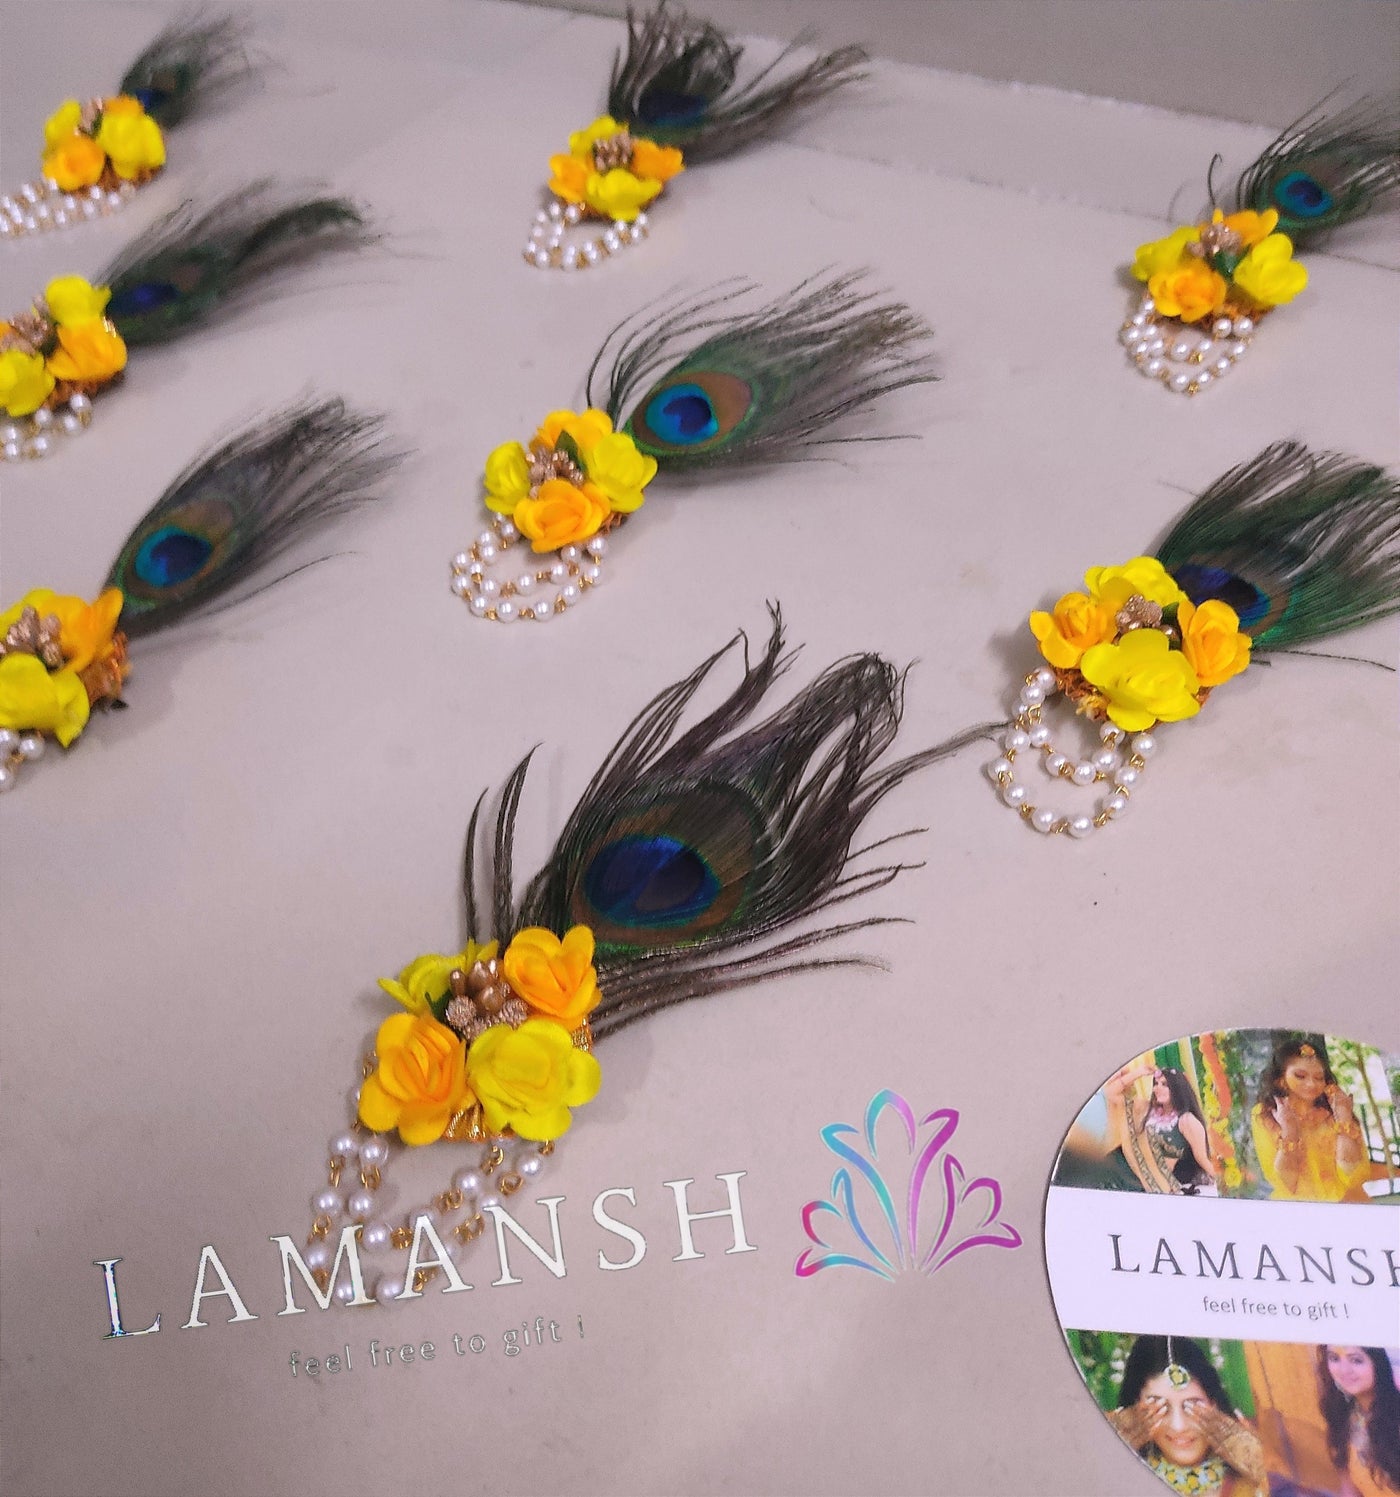 LAMANSH Floral 🌺 Giveaways Yellow / Set of 20 Broaches LAMANSH® Artificial Flower Brooches Broaches for Guests in Wedding & other events / Bridesmaid Giveaways Favours ✨ for haldi mehendi sangeet